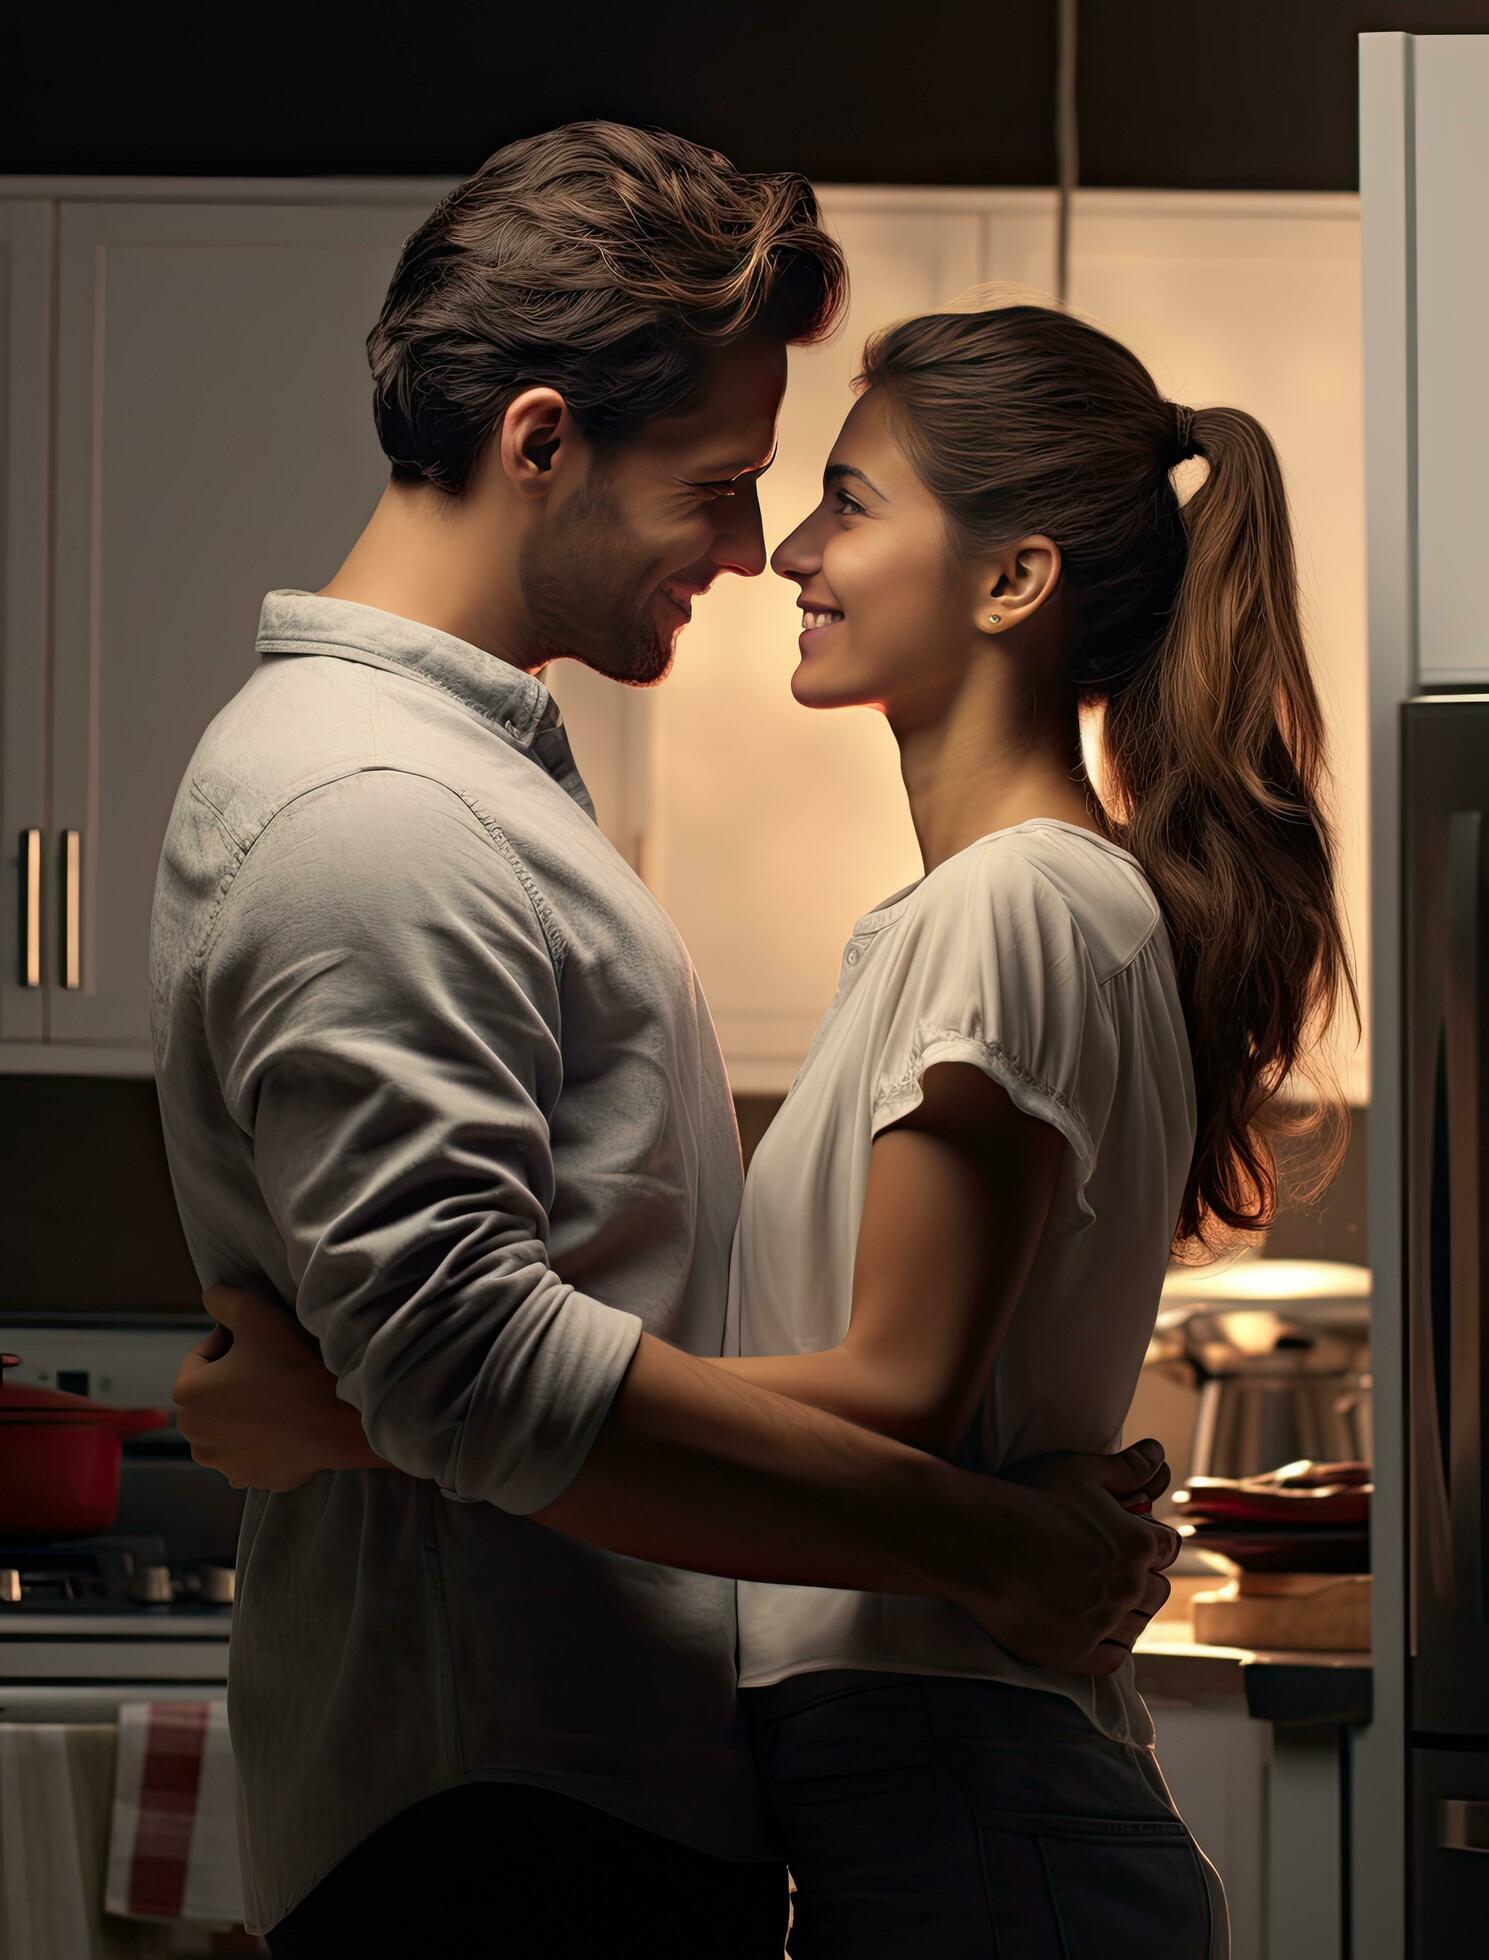 https://static.vecteezy.com/system/resources/previews/027/185/919/large_2x/minimal-waist-up-portrait-of-affectionate-couple-in-kitchen-gazing-at-each-other-blank-area-free-photo.jpg